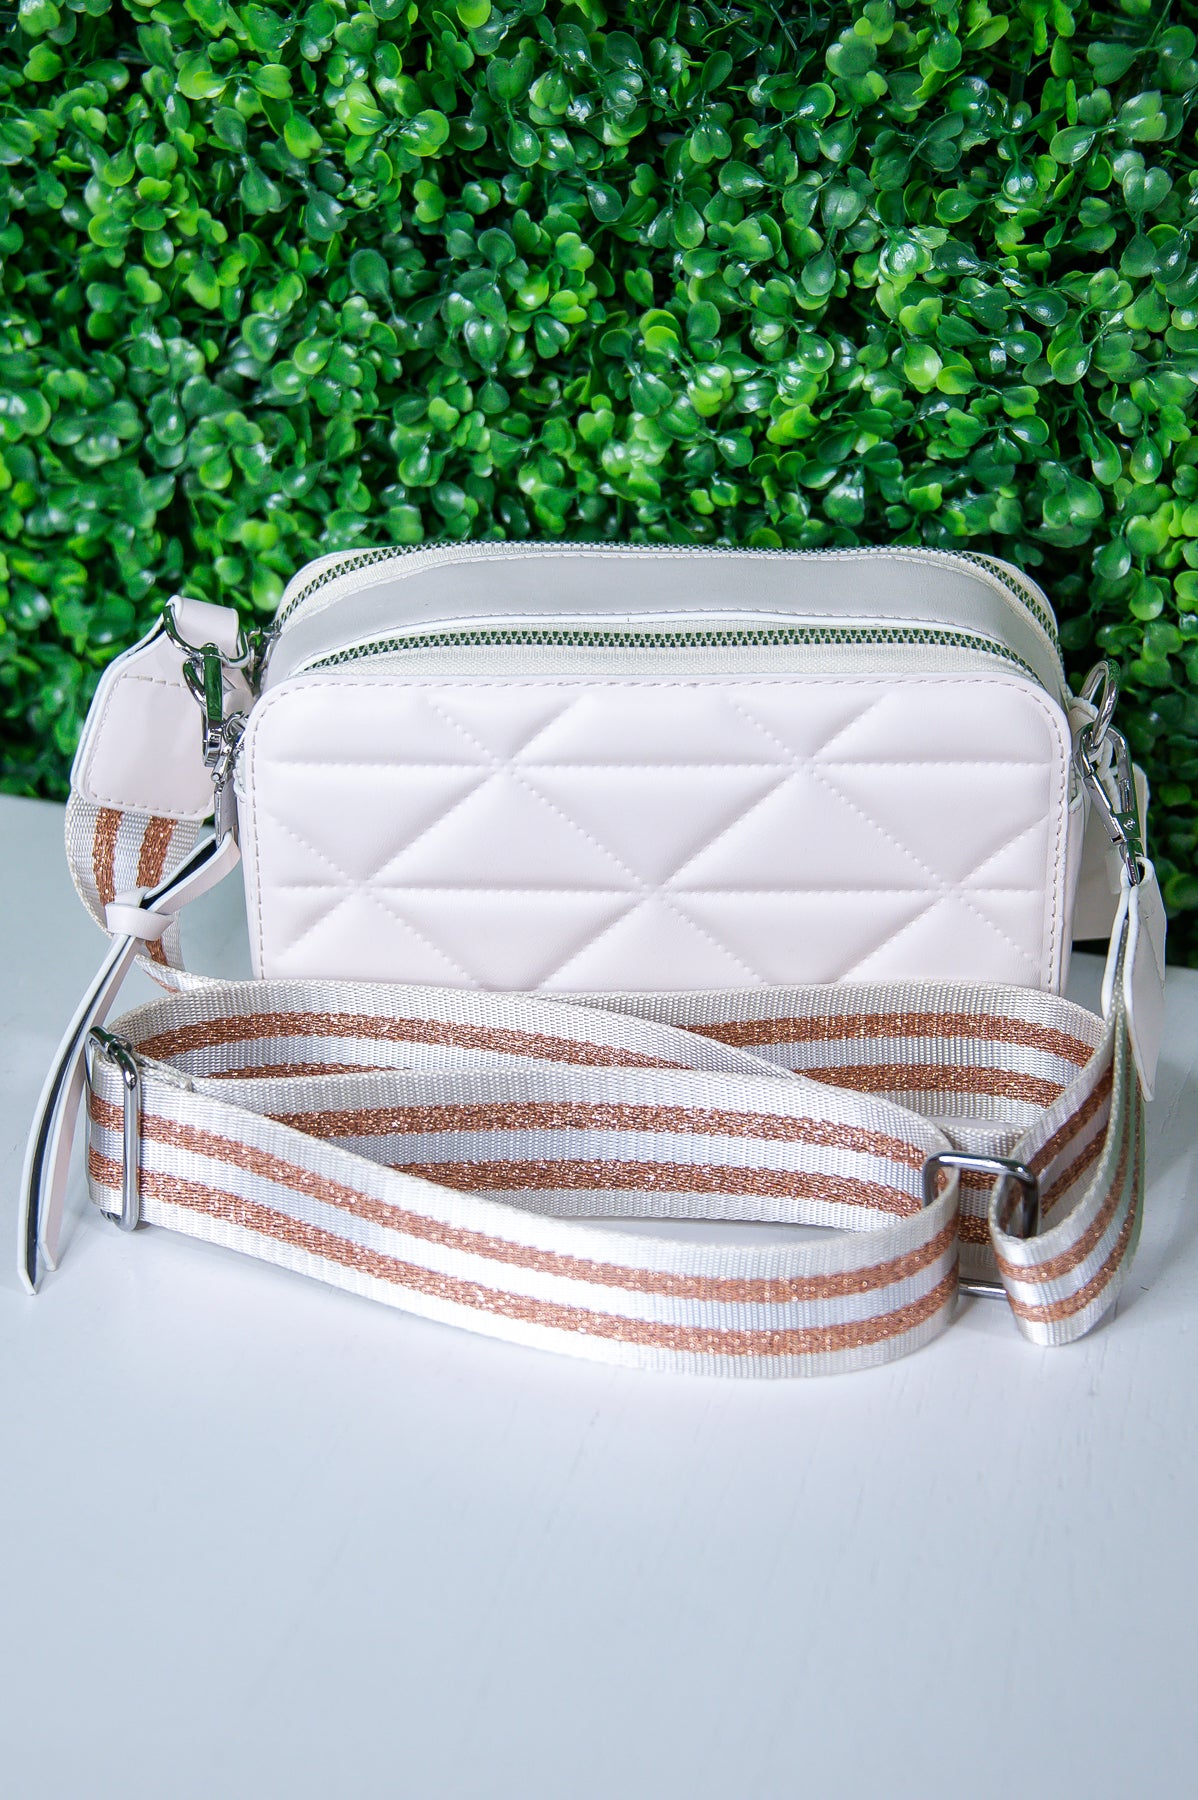 Give Me Hope White Solid Chevron Quilted Bag - BAG1862WH